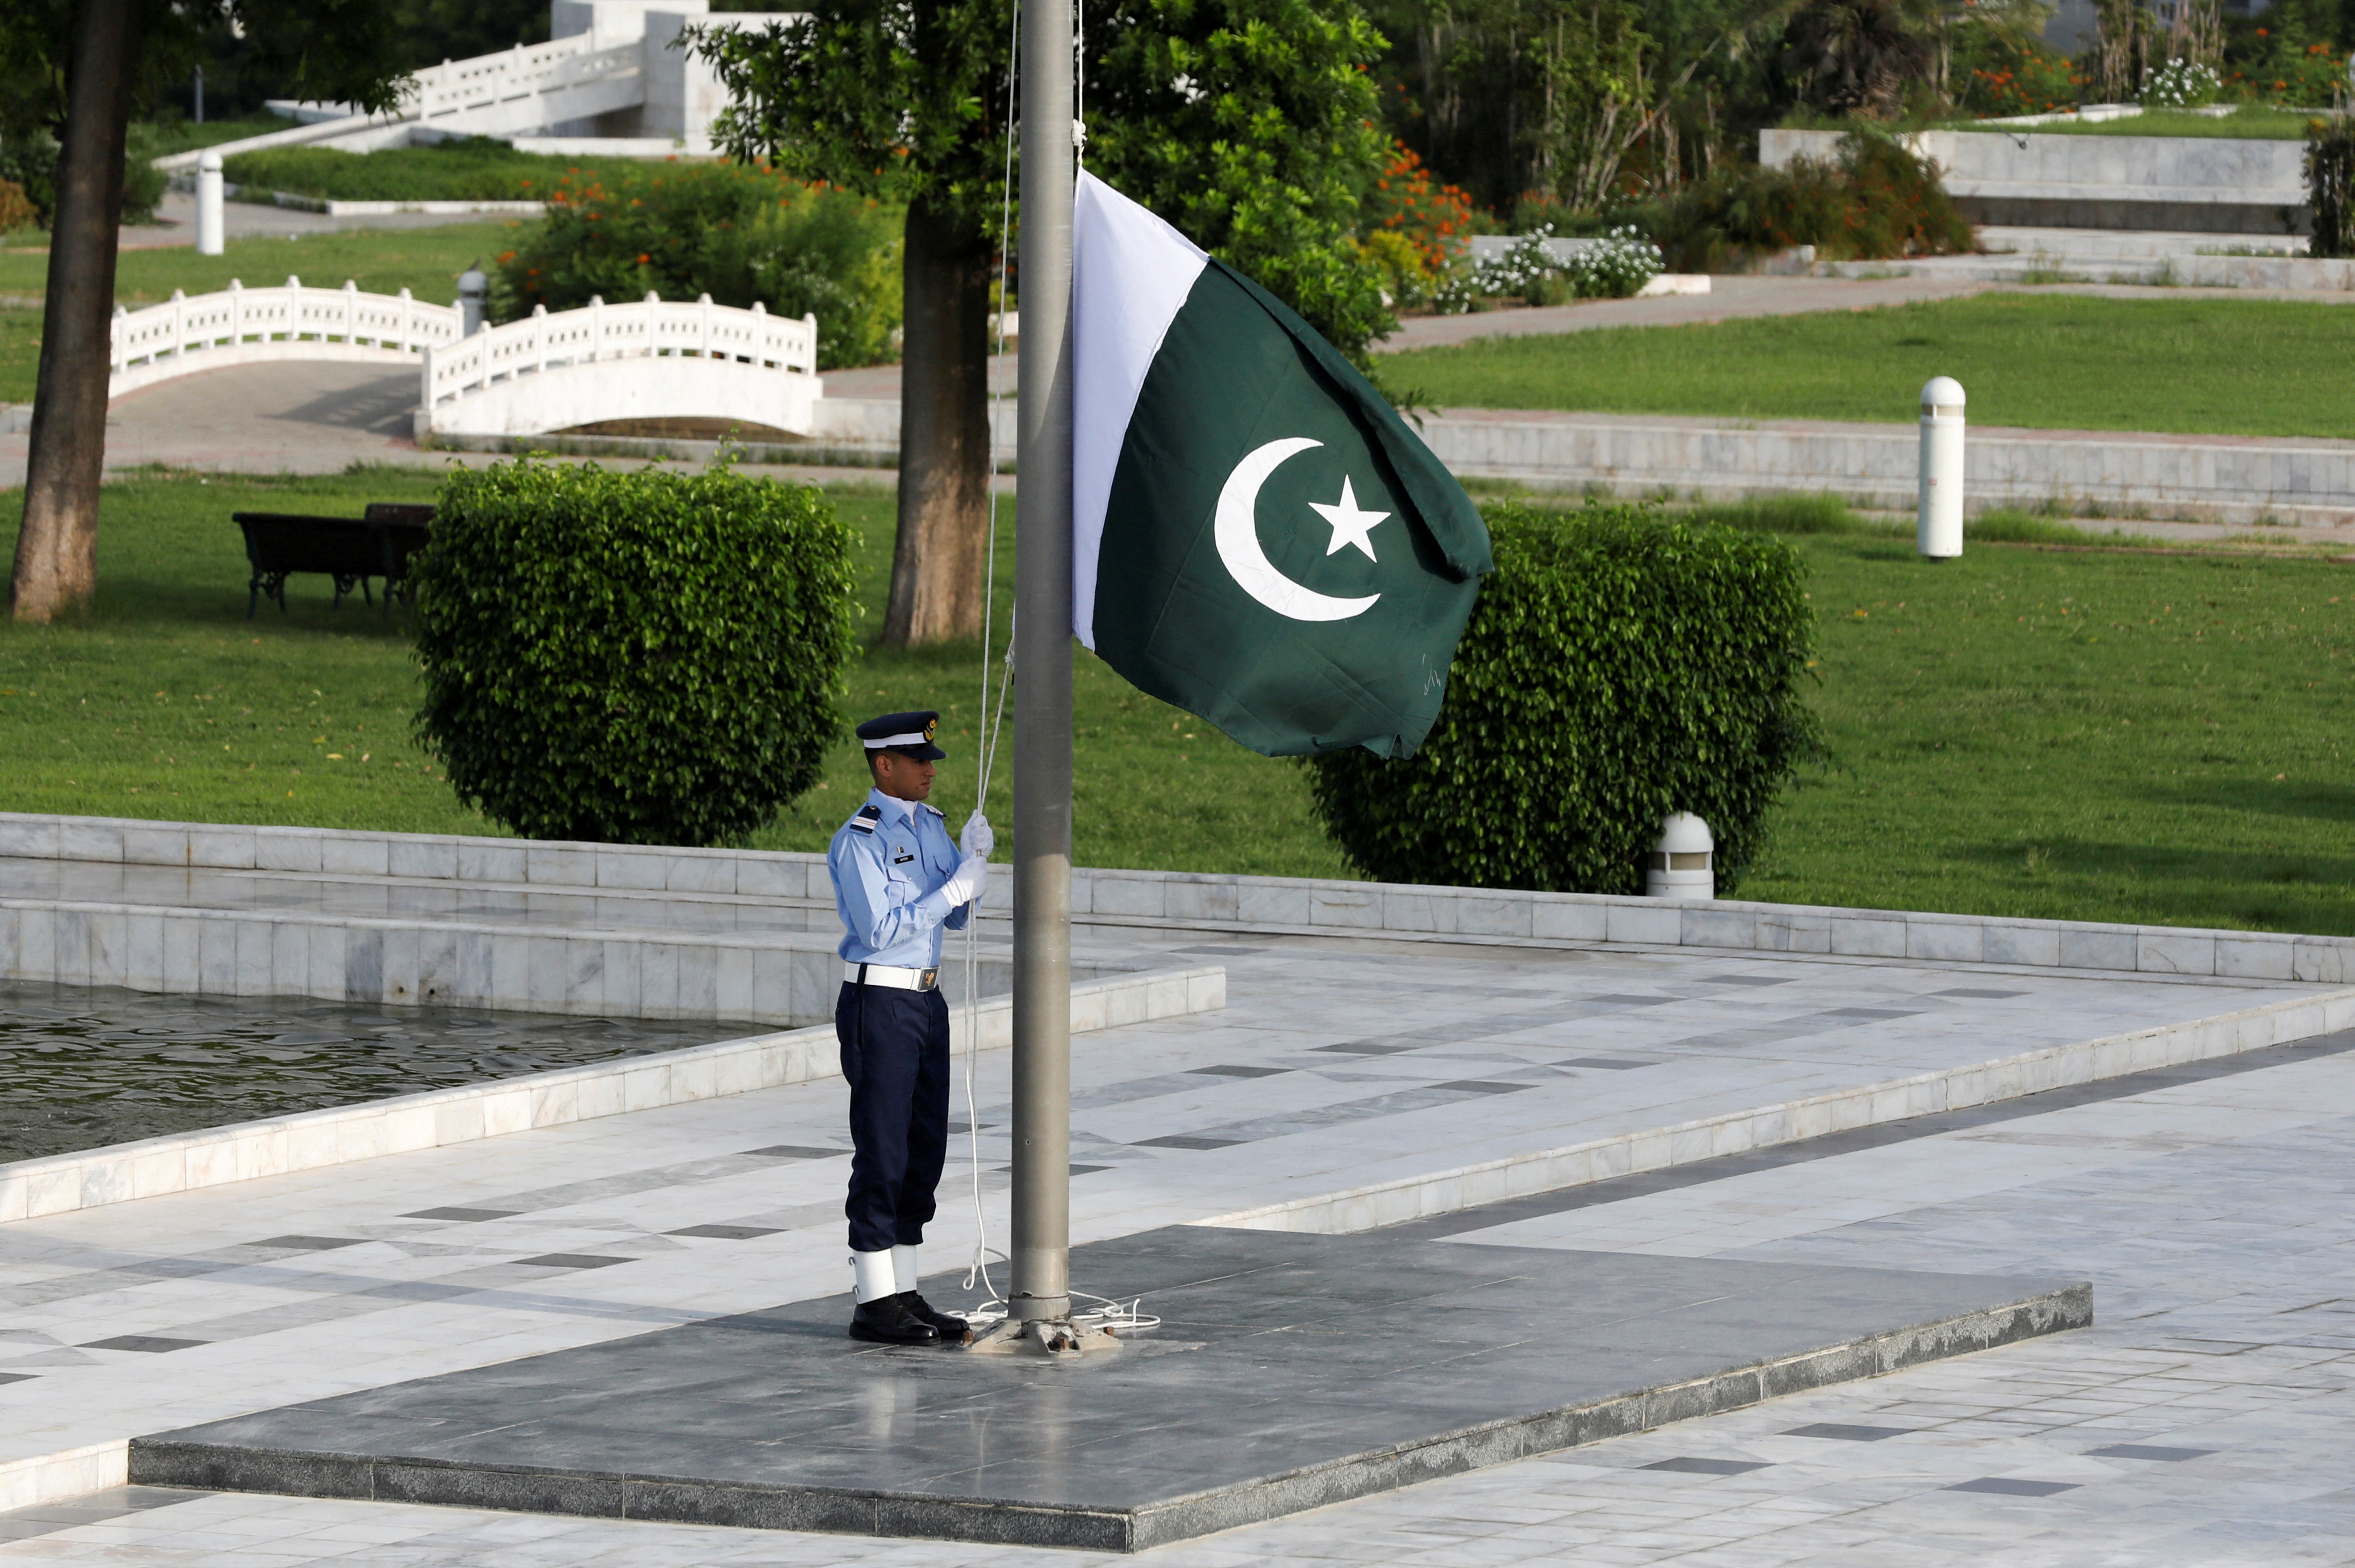 A member of the Pakistan Air Force (PAF) rehearses flag masting at the mausoleum of Muhammad Ali Jinnah before the Defence Day ceremonies, or Pakistan's Memorial Day, in Karachi